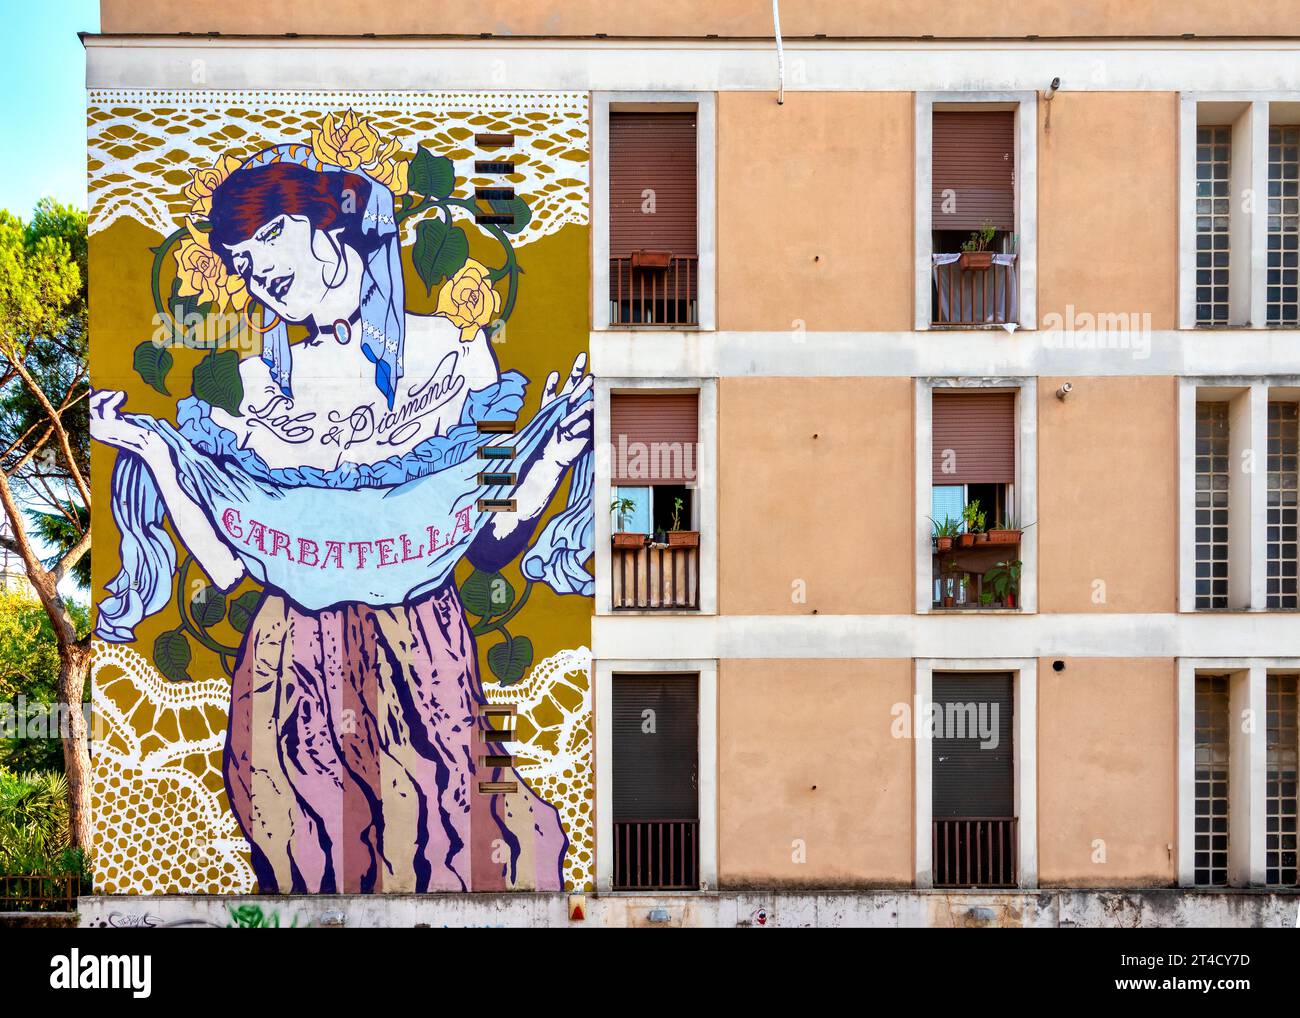 A mural by Solo and Diamond commemorating the centennial of the Garbatella founding in Via Passino, Rome, Italy Stock Photo